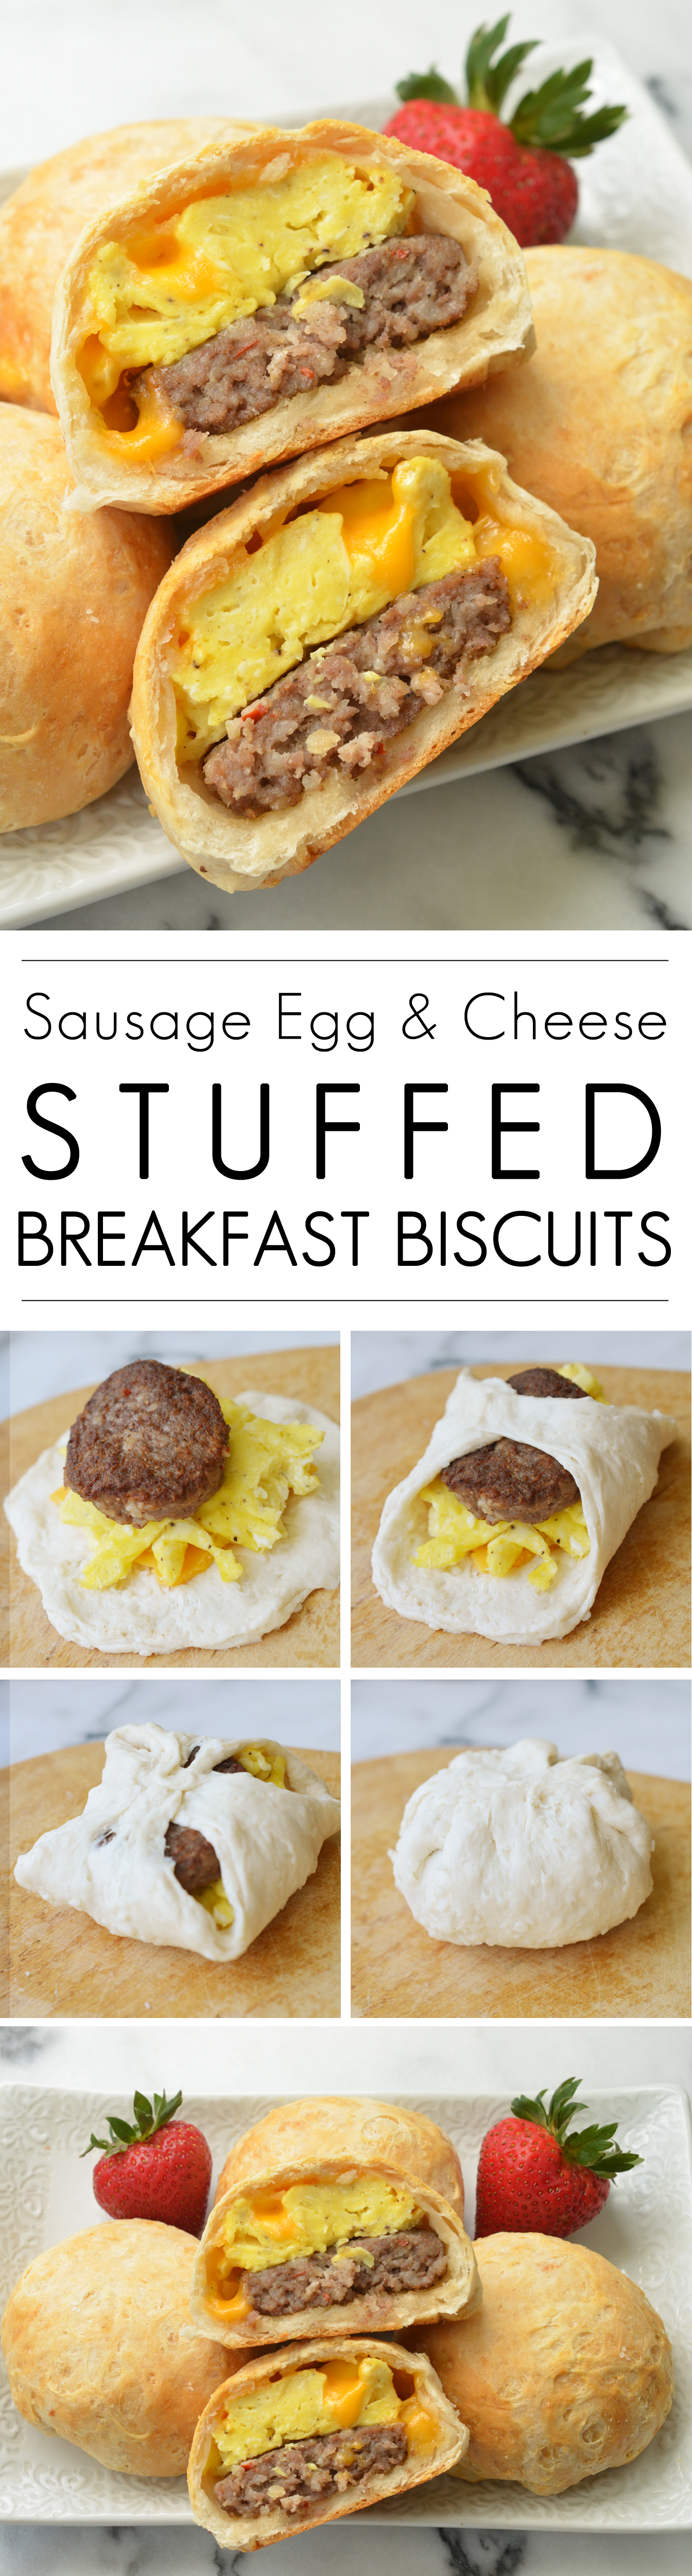 These 5-ingredient Sausage Egg Stuffed Breakfast Biscuits make mornings less hectic. This make-ahead breakfast is an easy recipe that makes meal prep a snap.